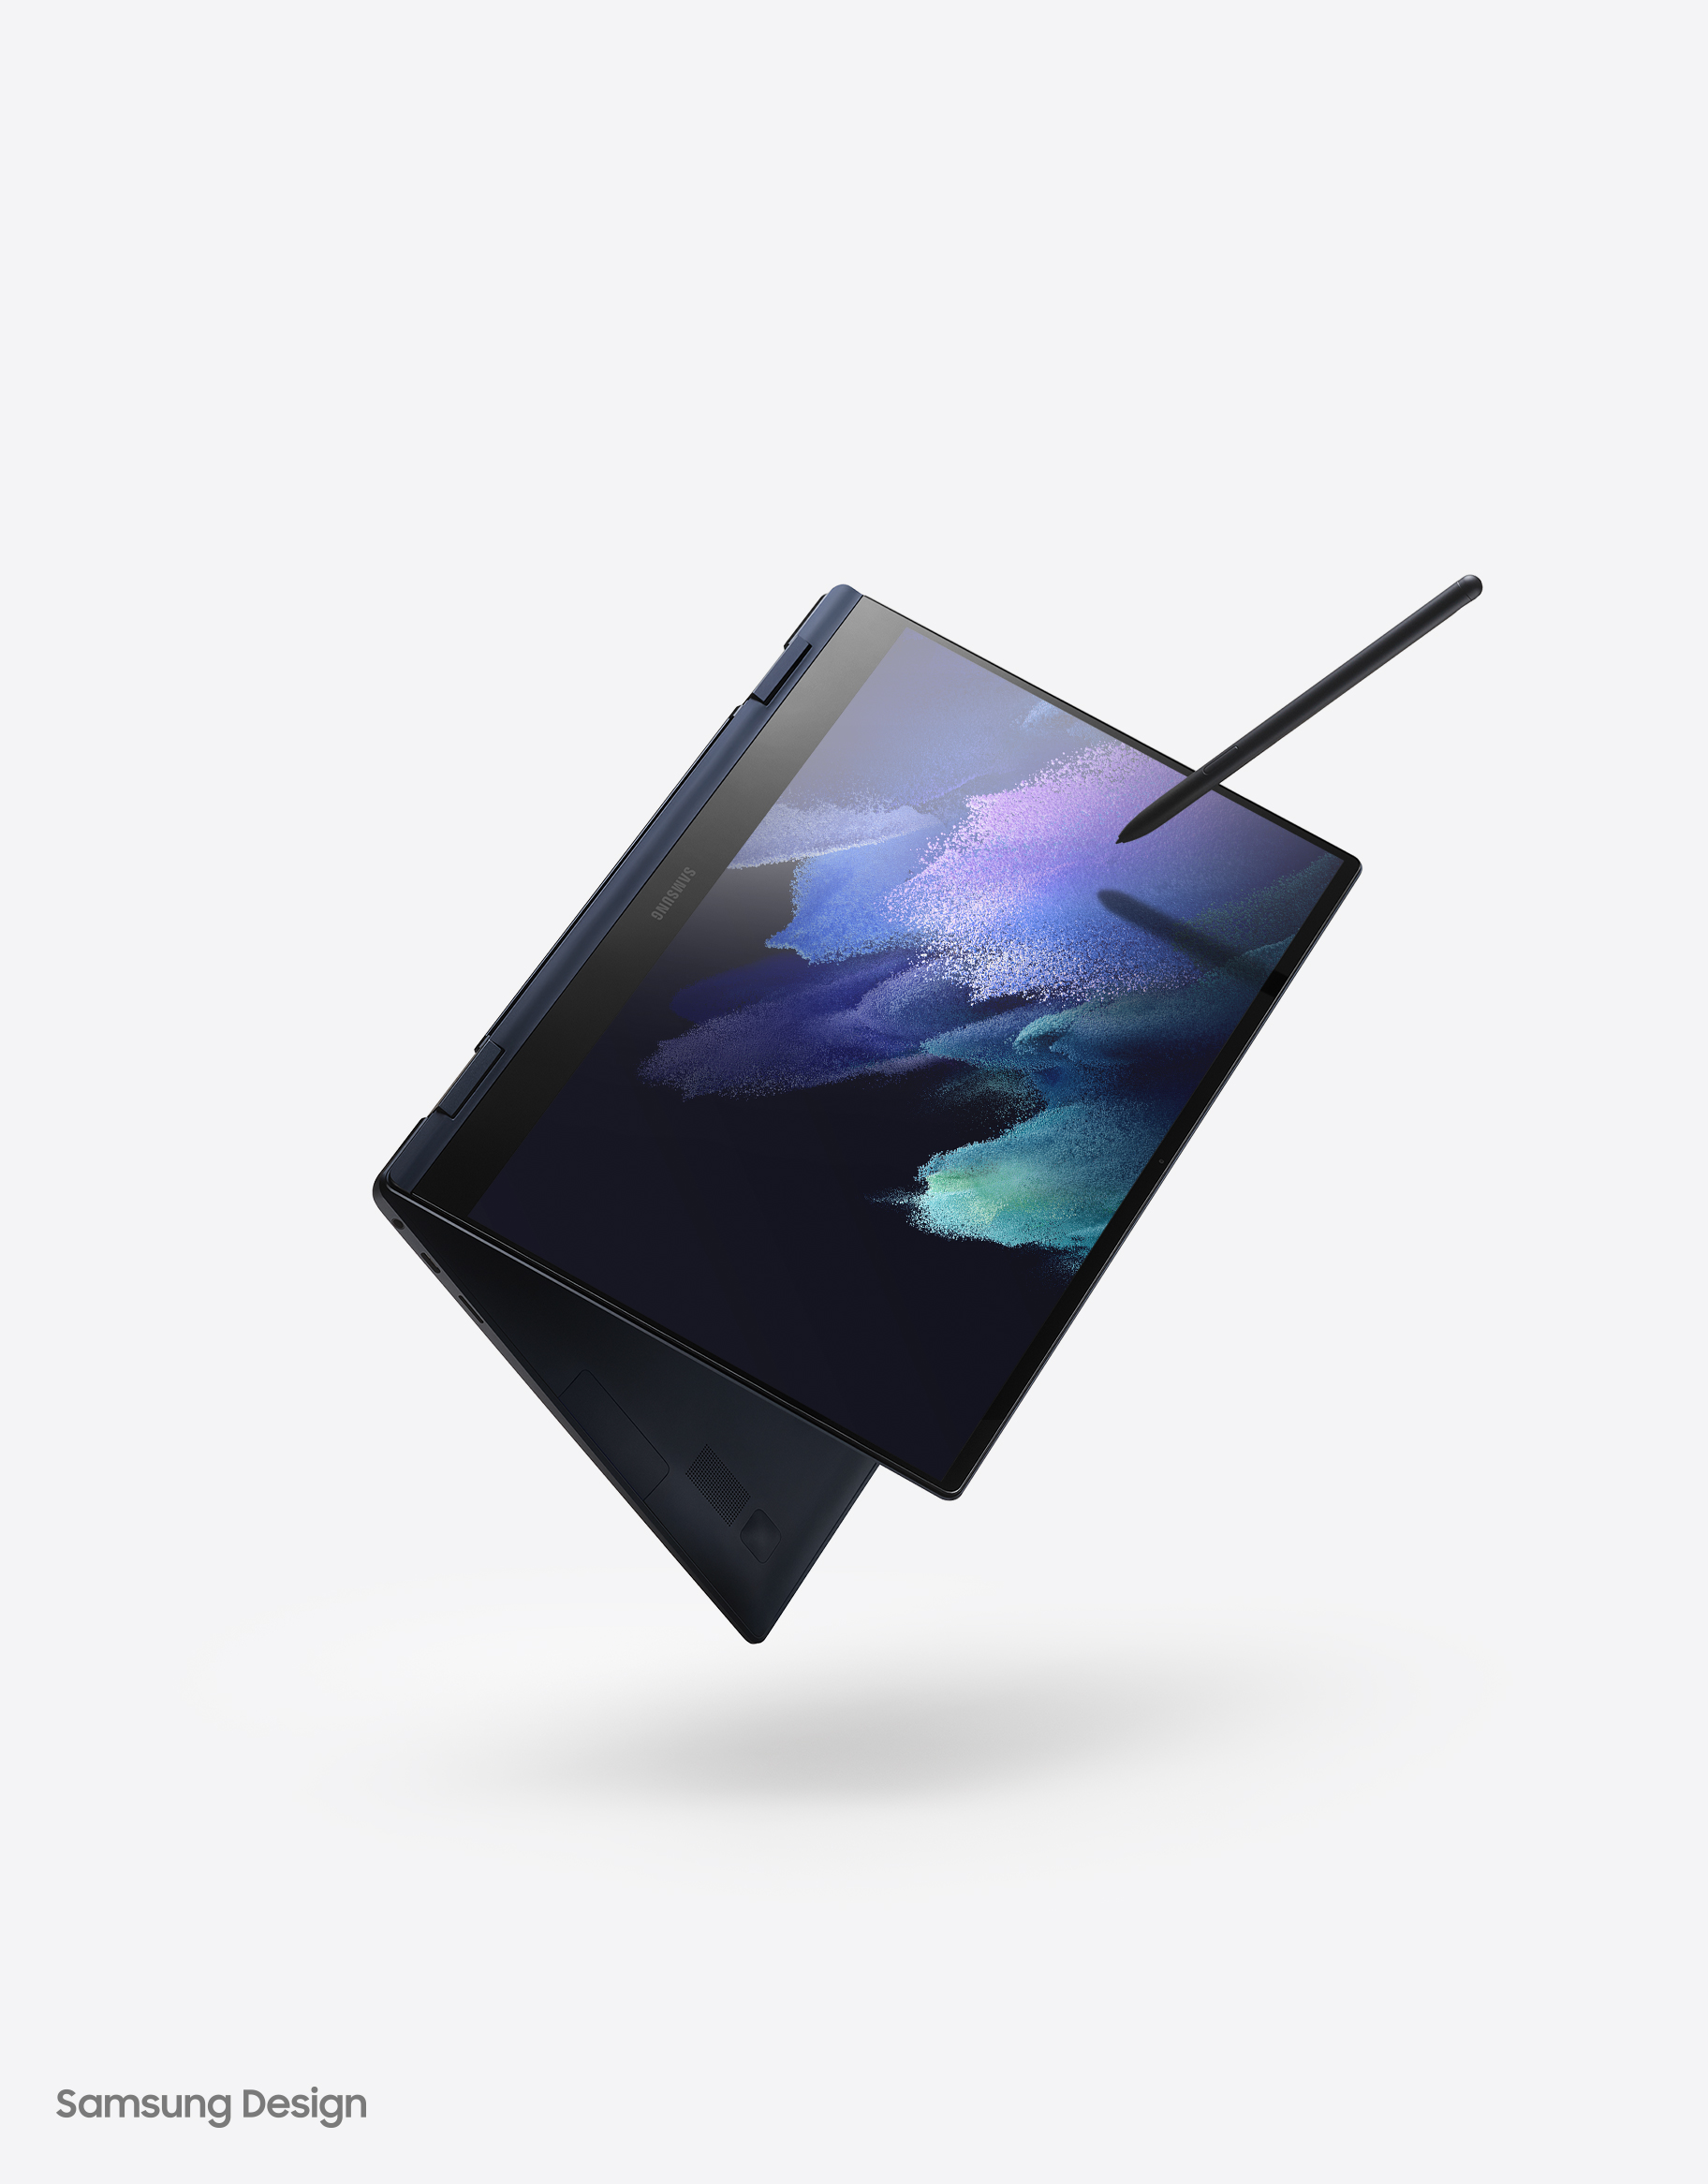 Galaxy Book Pro and Galaxy Book Pro 360 Design Story